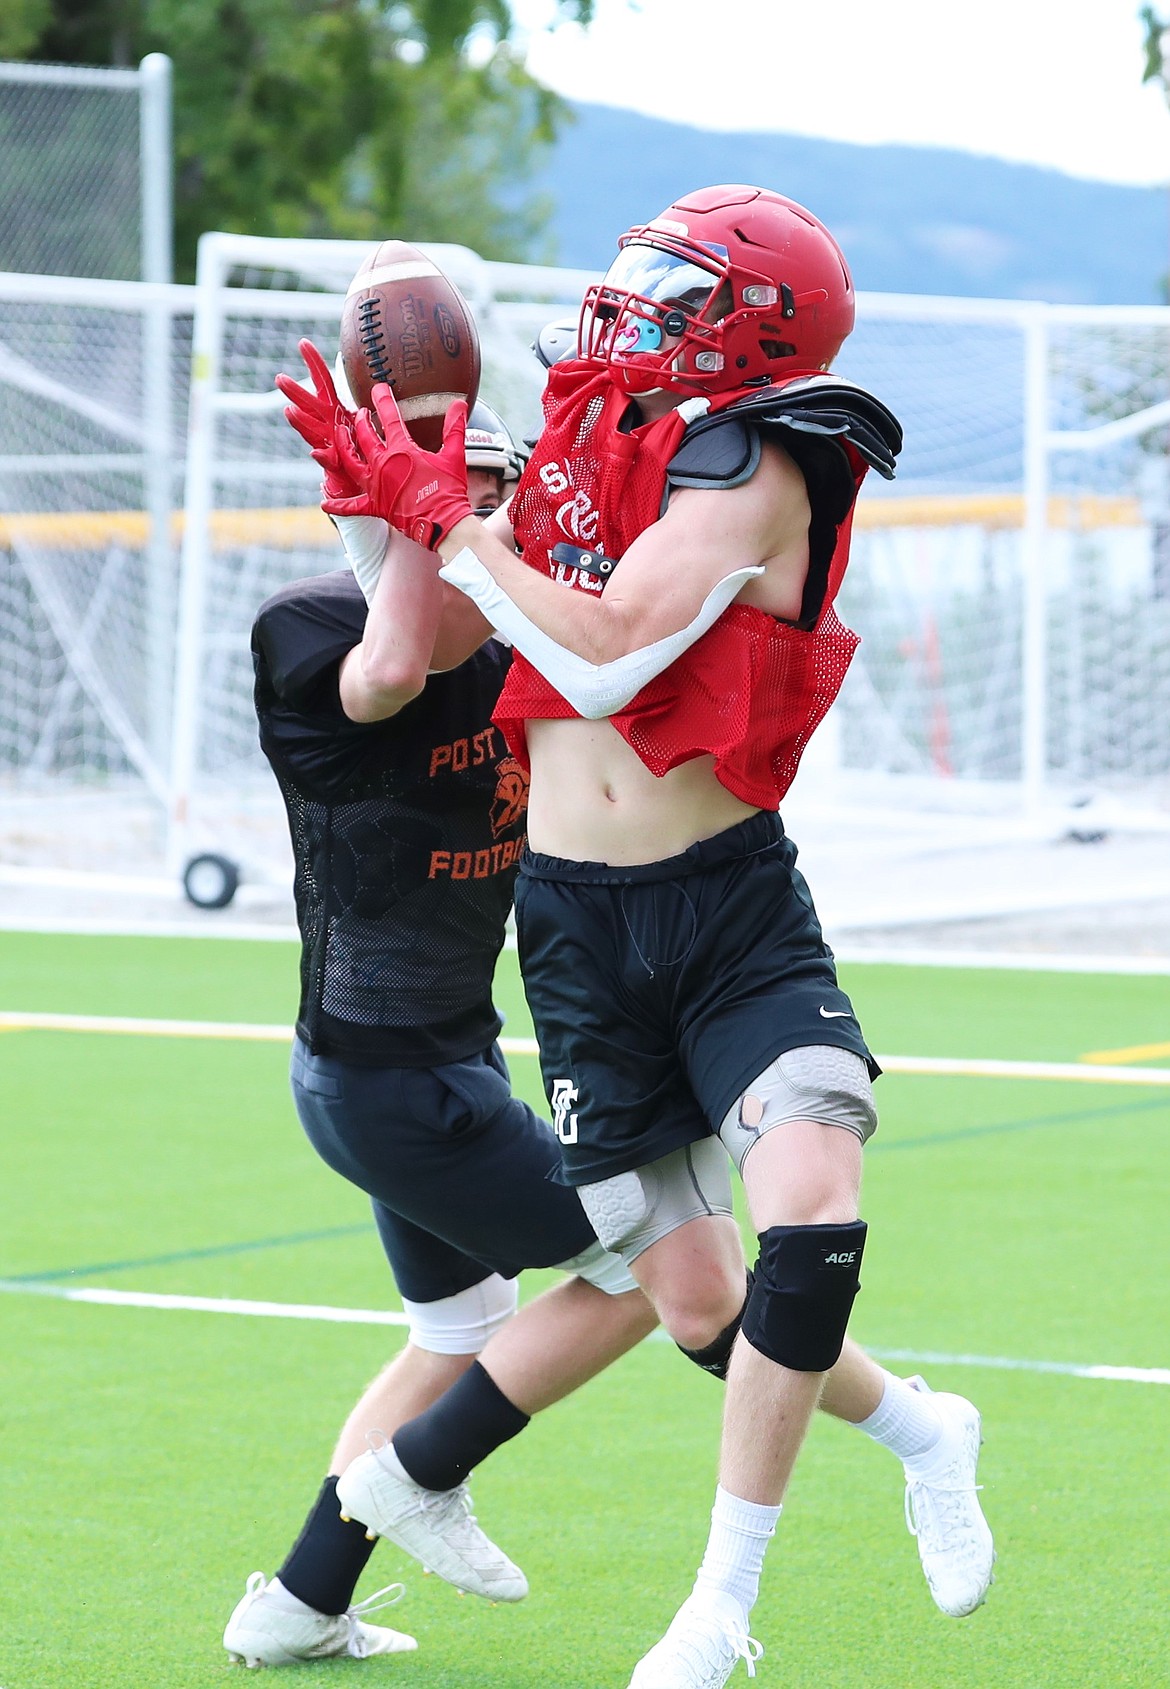 Wide receiver Cody Newhart attempts to haul in a touchdown catch on Wednesday.